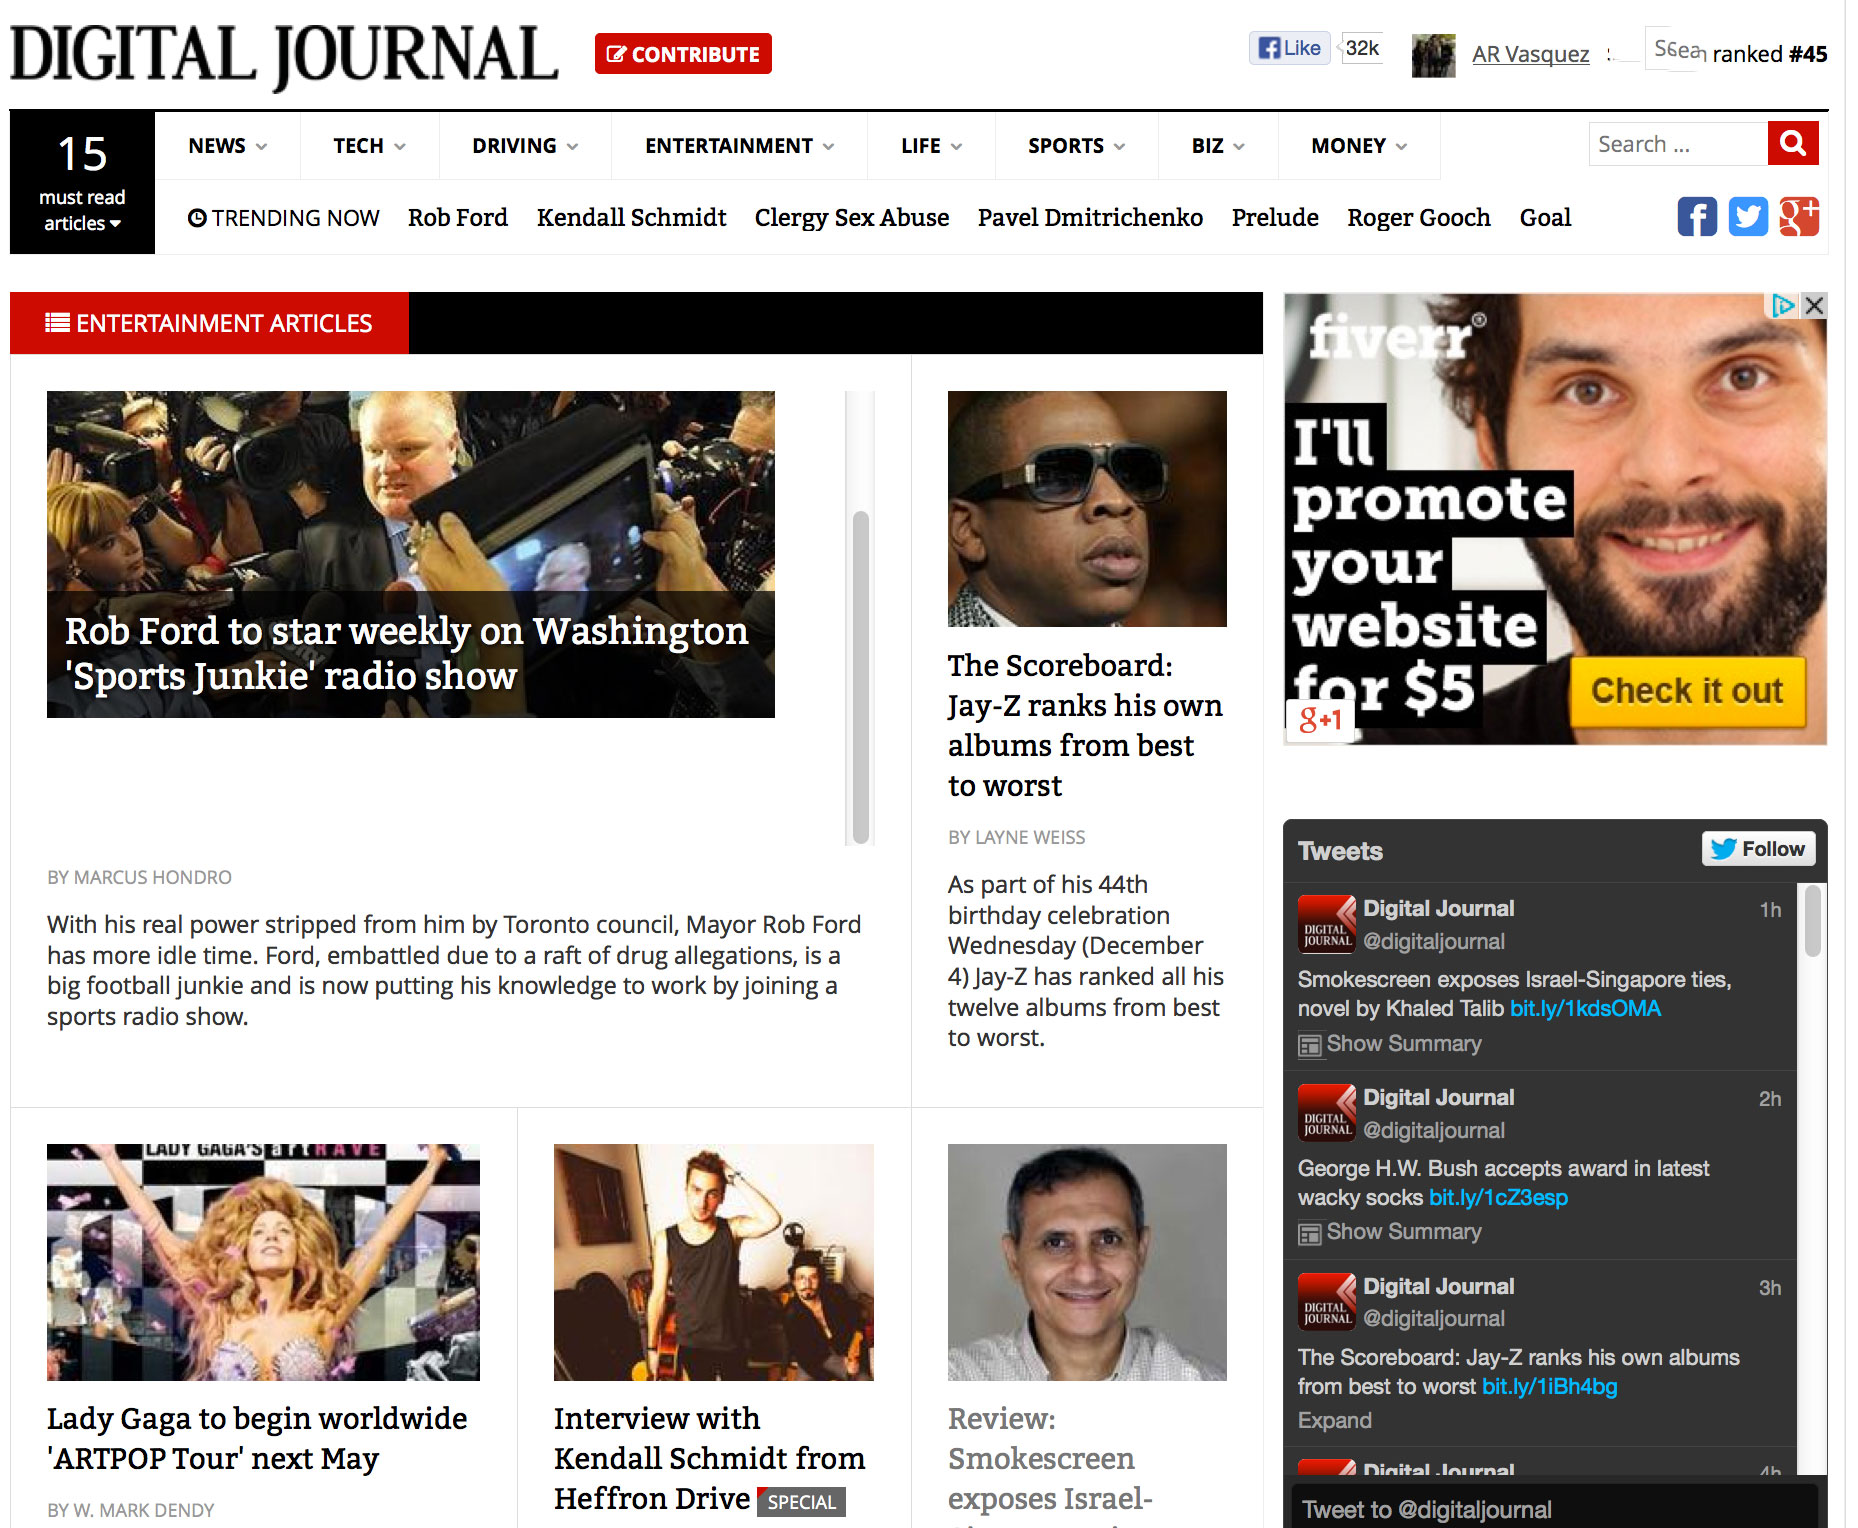 Smokescreen by Khaled Talib on frontpage of Entertainment - Digital Journal